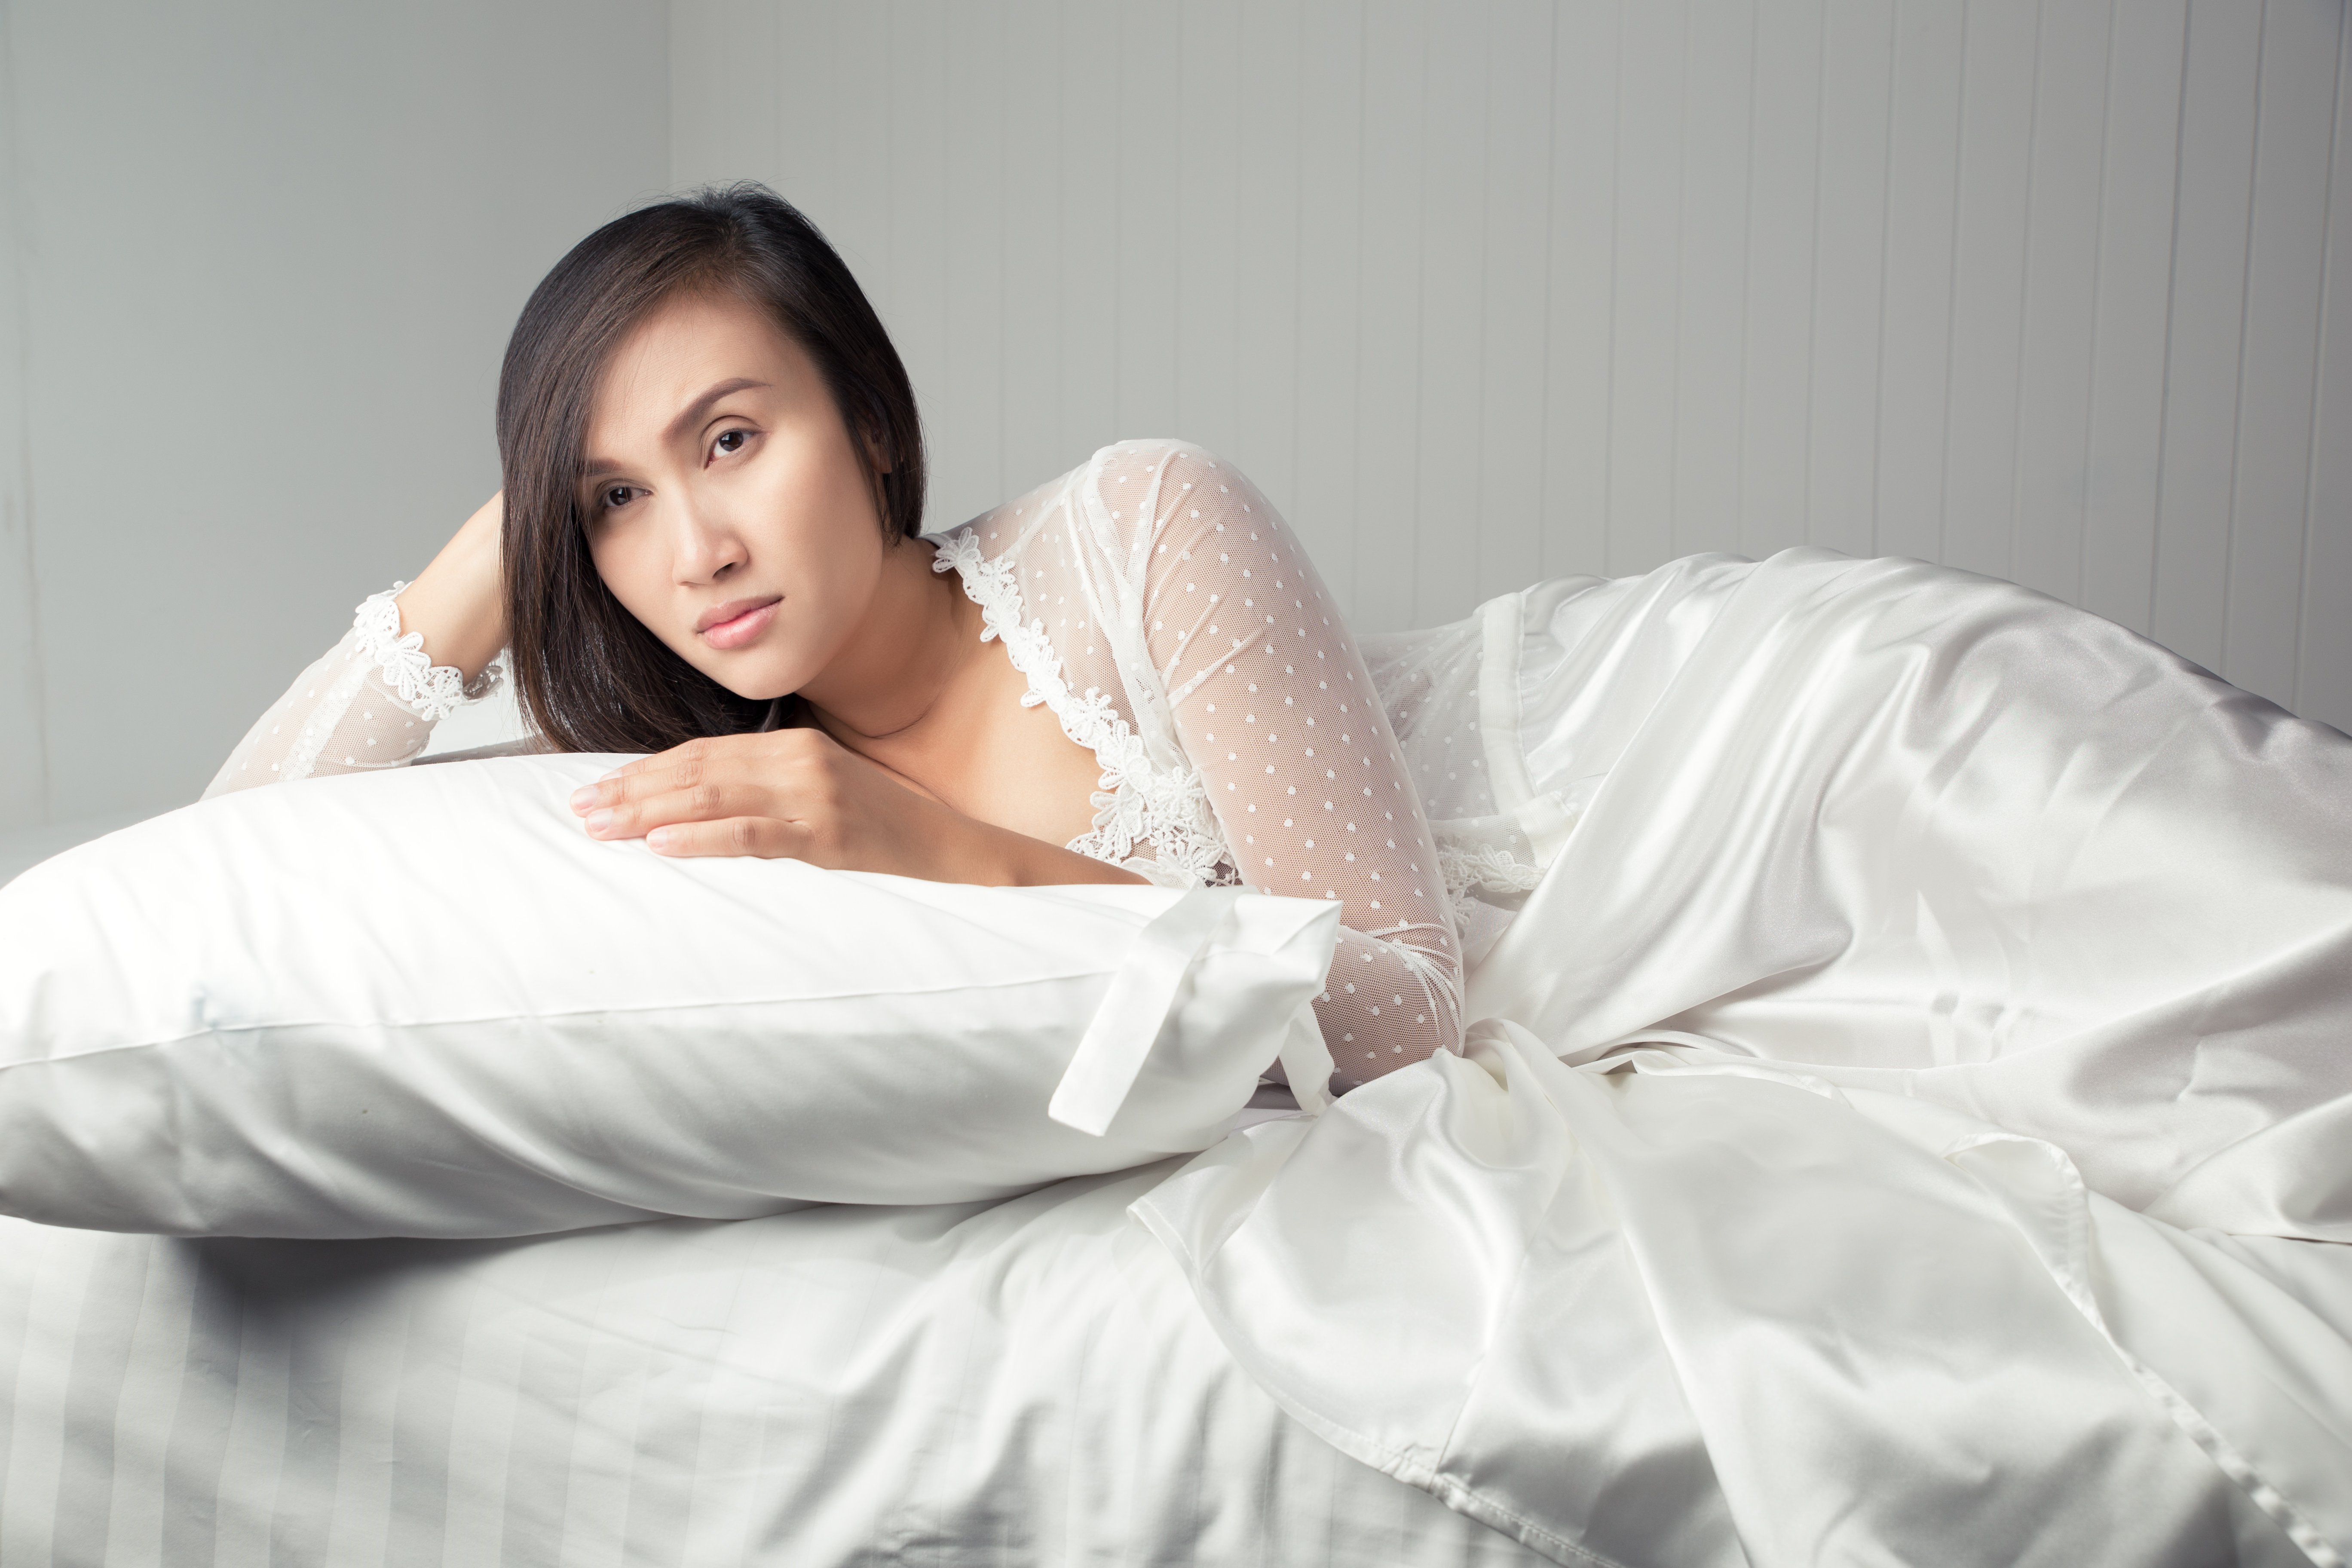 Woman showcasing luxurious bedding. | Source: Getty Images